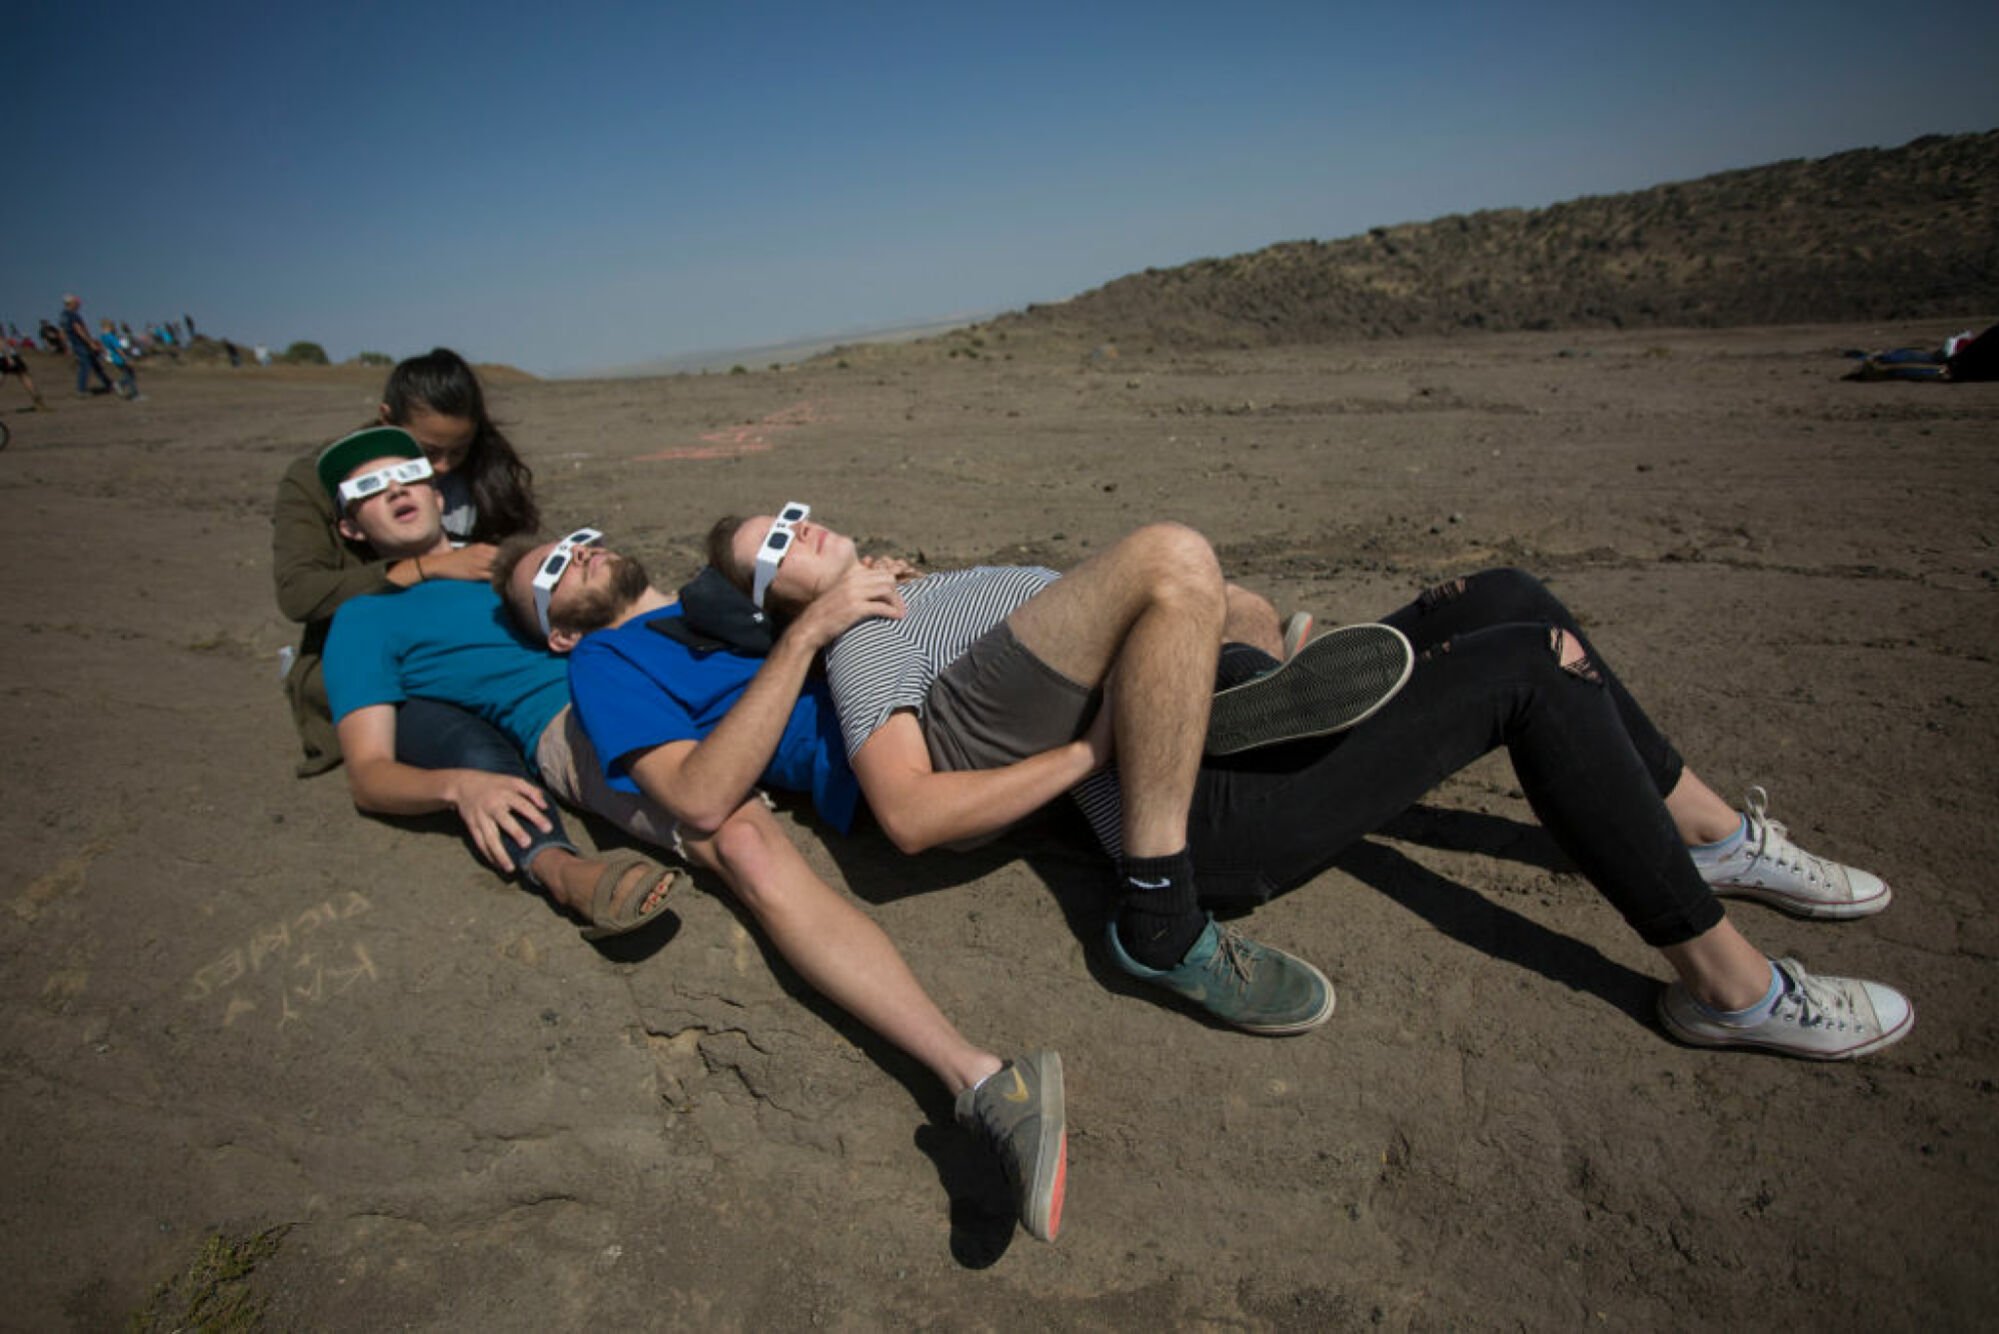 College students watching a total solar eclipse together